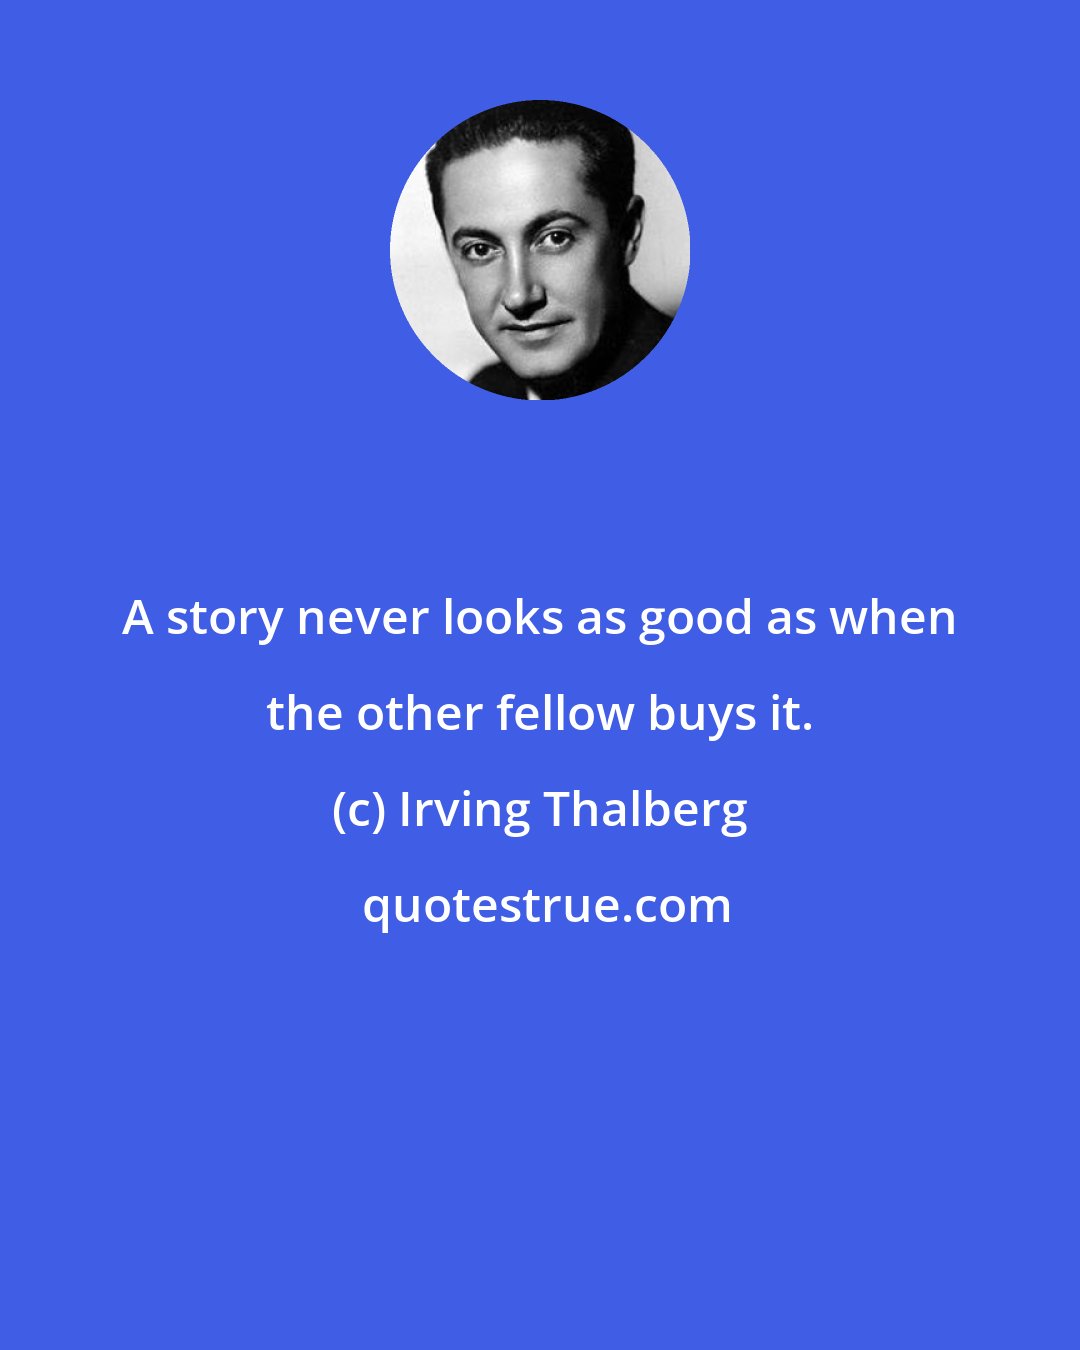 Irving Thalberg: A story never looks as good as when the other fellow buys it.